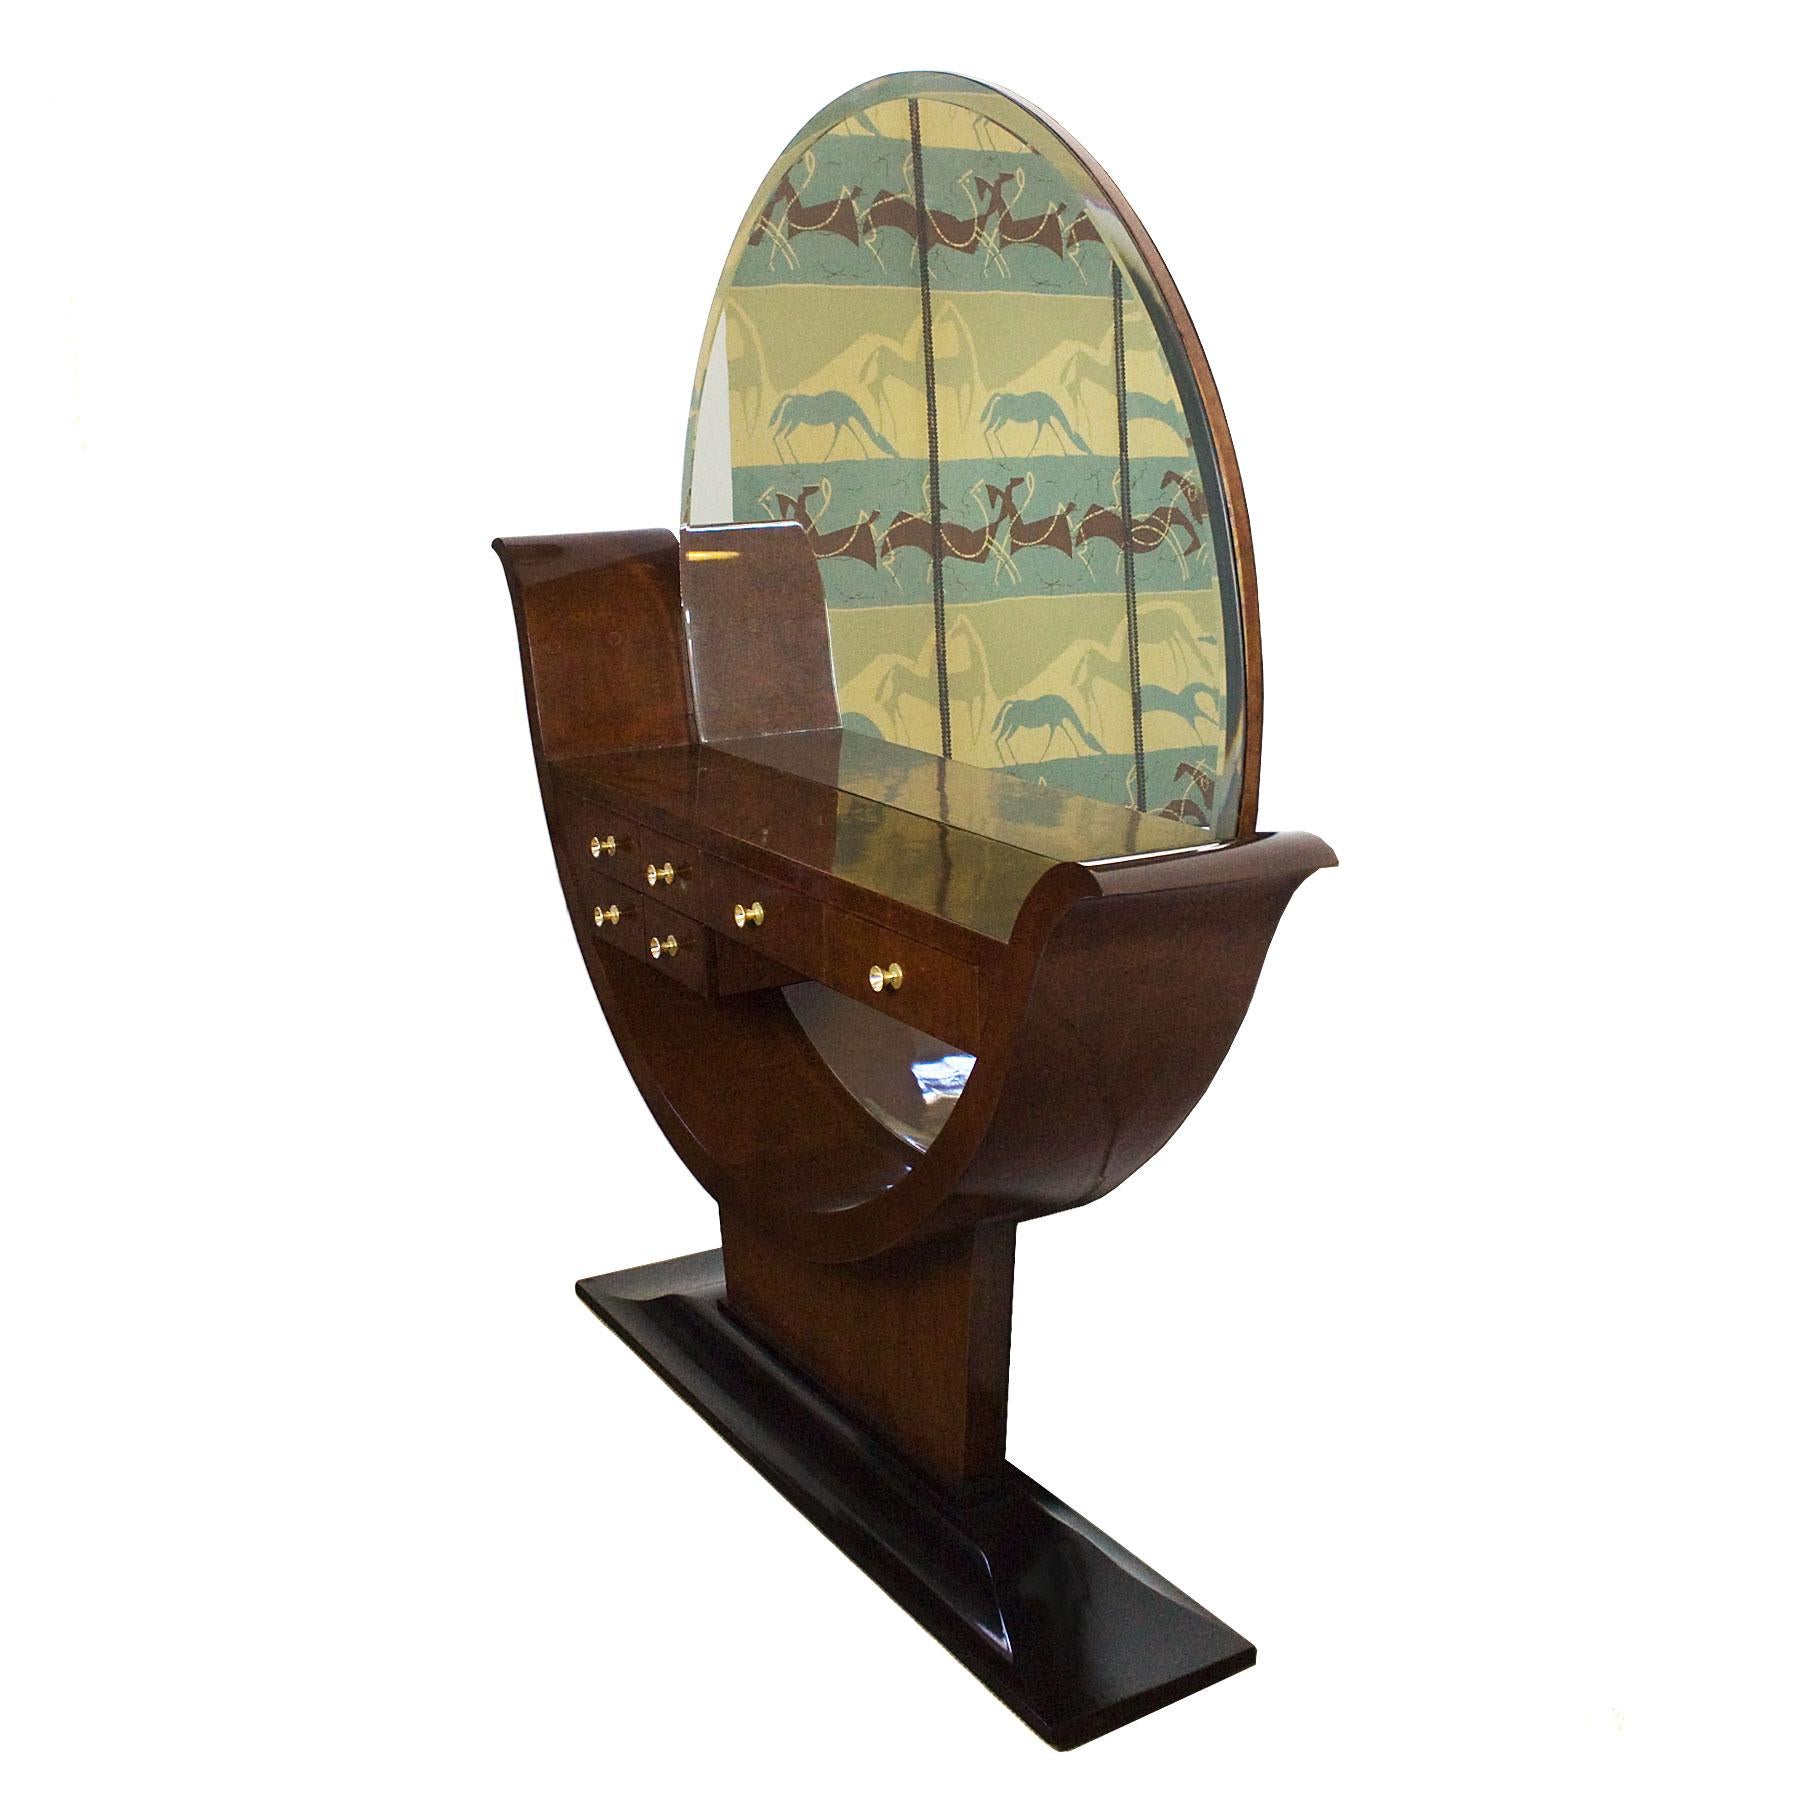 Rare Art Deco entrance hall console with six drawers, solid wood with mottled mahogany veneer, French polish. Black lacquered solid walnut base. Original round beveled mirror. Polished brass handles.

Spain, Barcelona, circa 1930.